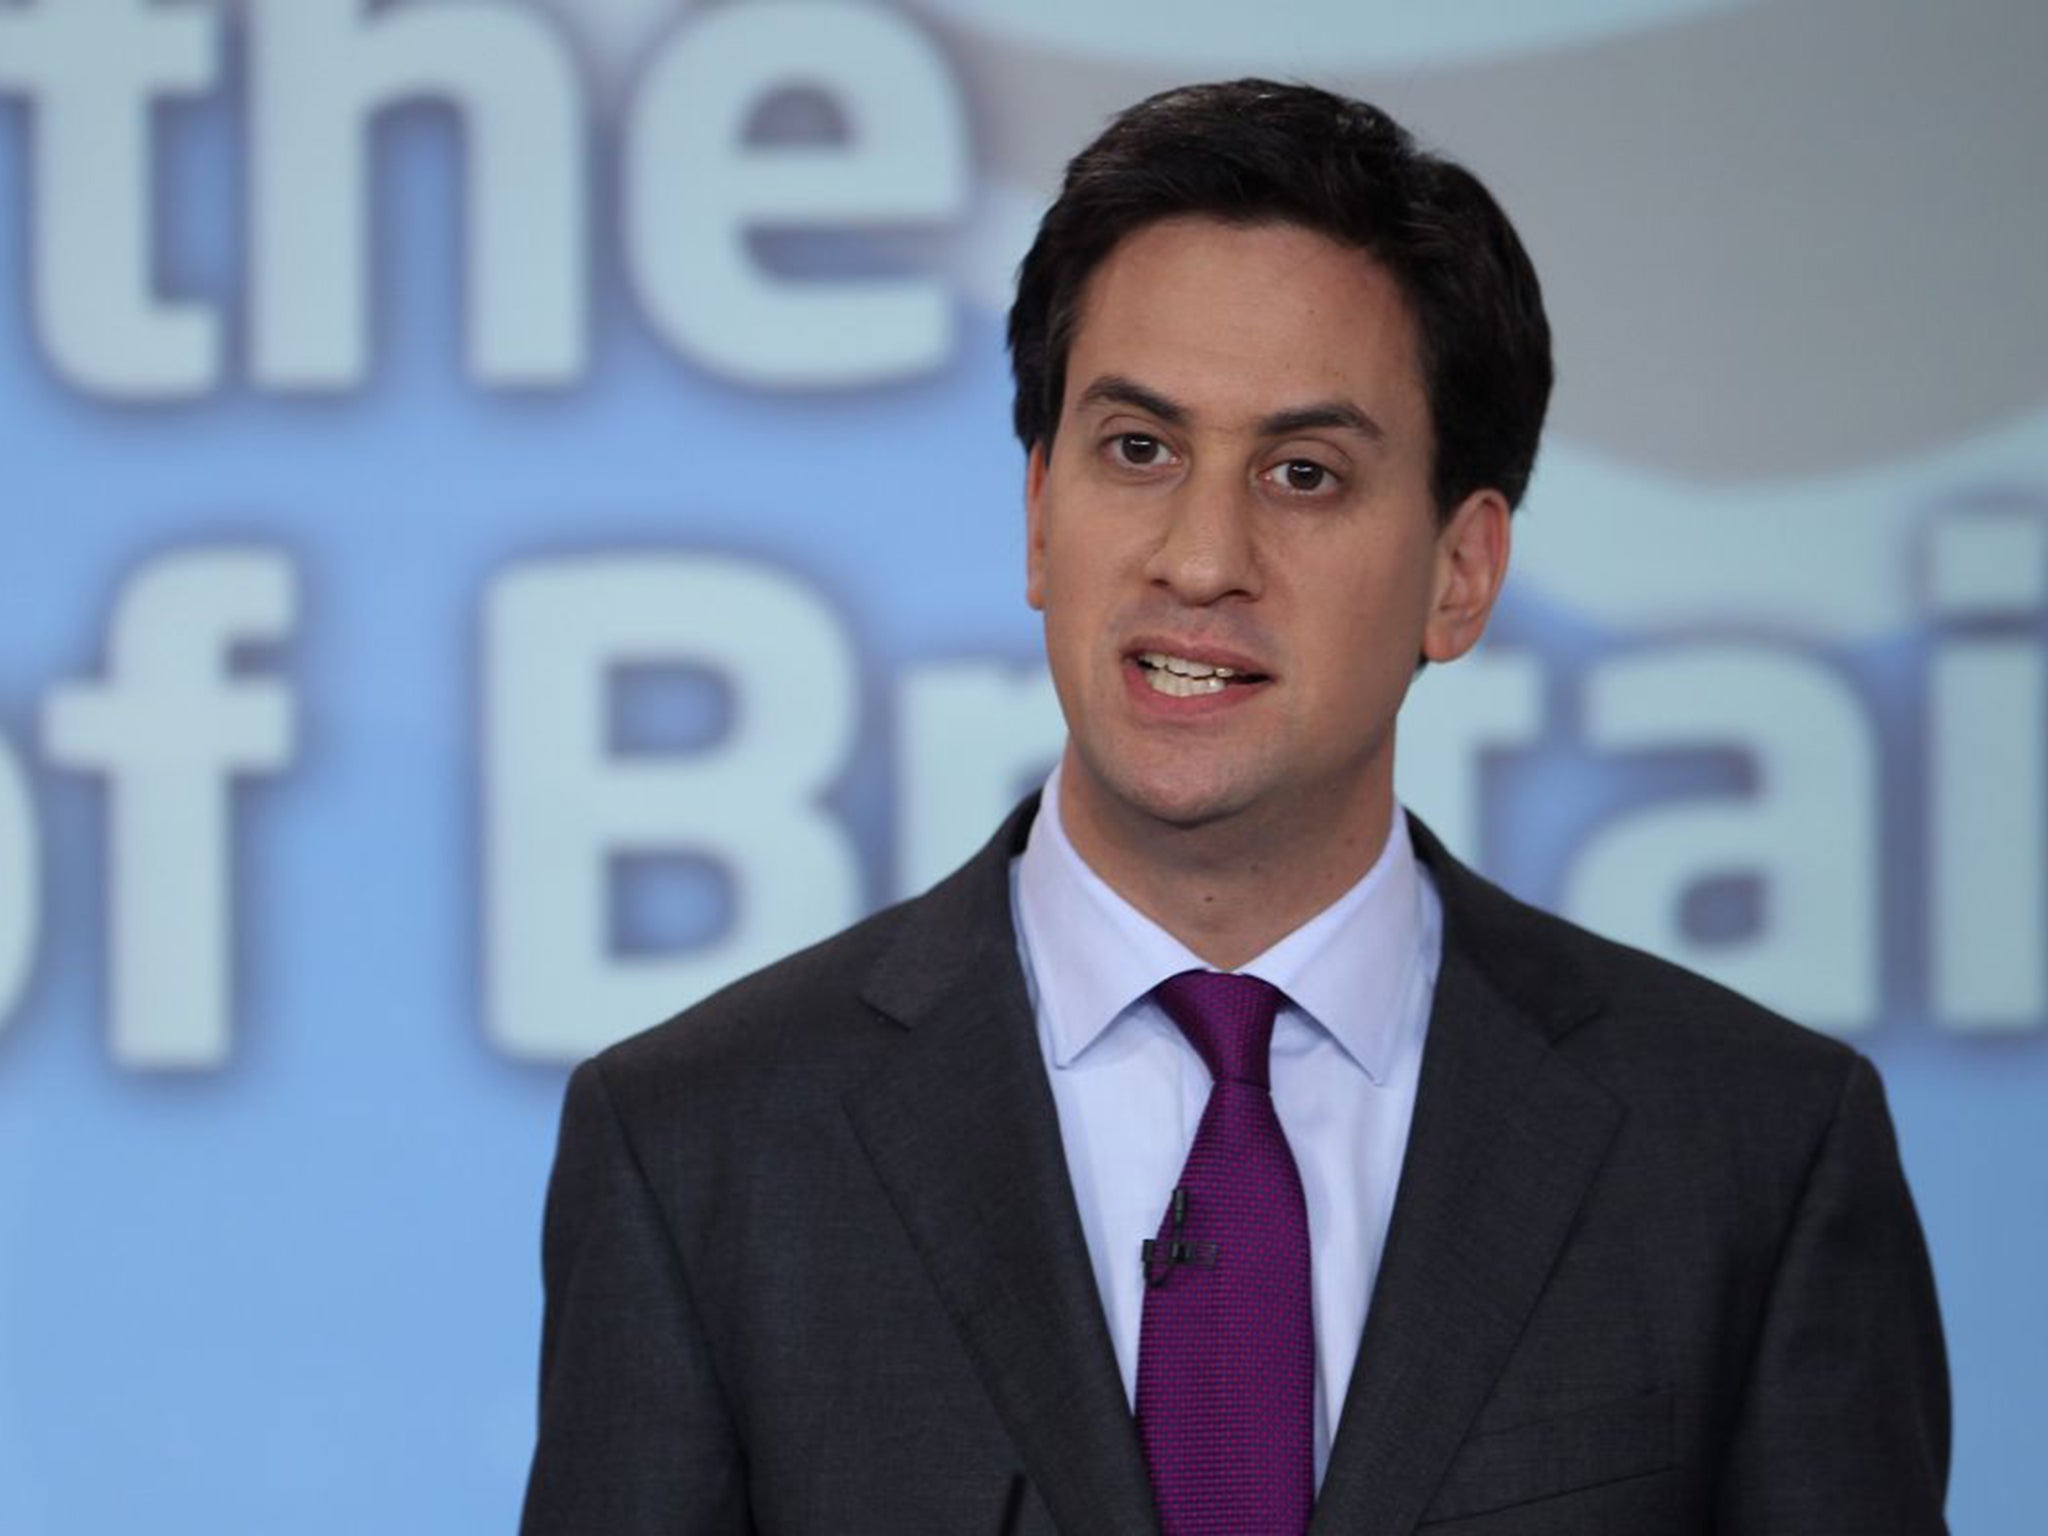 Ed Miliband has challenged the Coalition to pledge that they will not raise tuition fees beyond £9,000